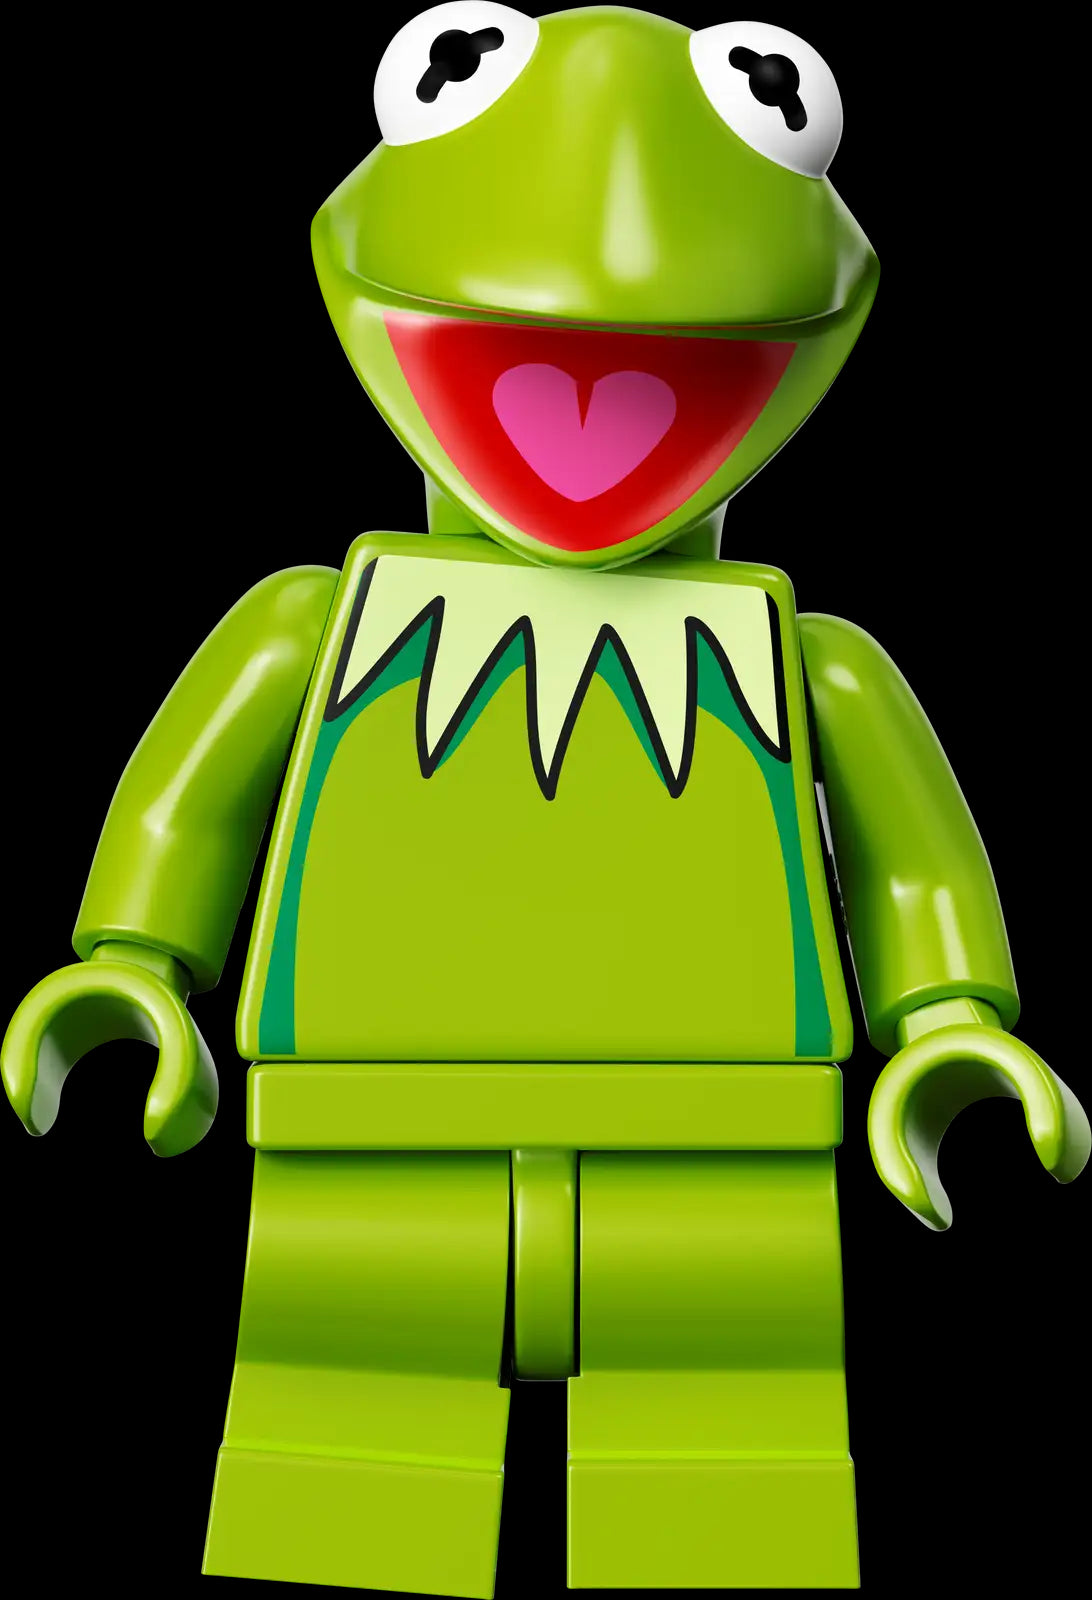 Lego Minifigures Muppets Series Kermit The Frog - 2